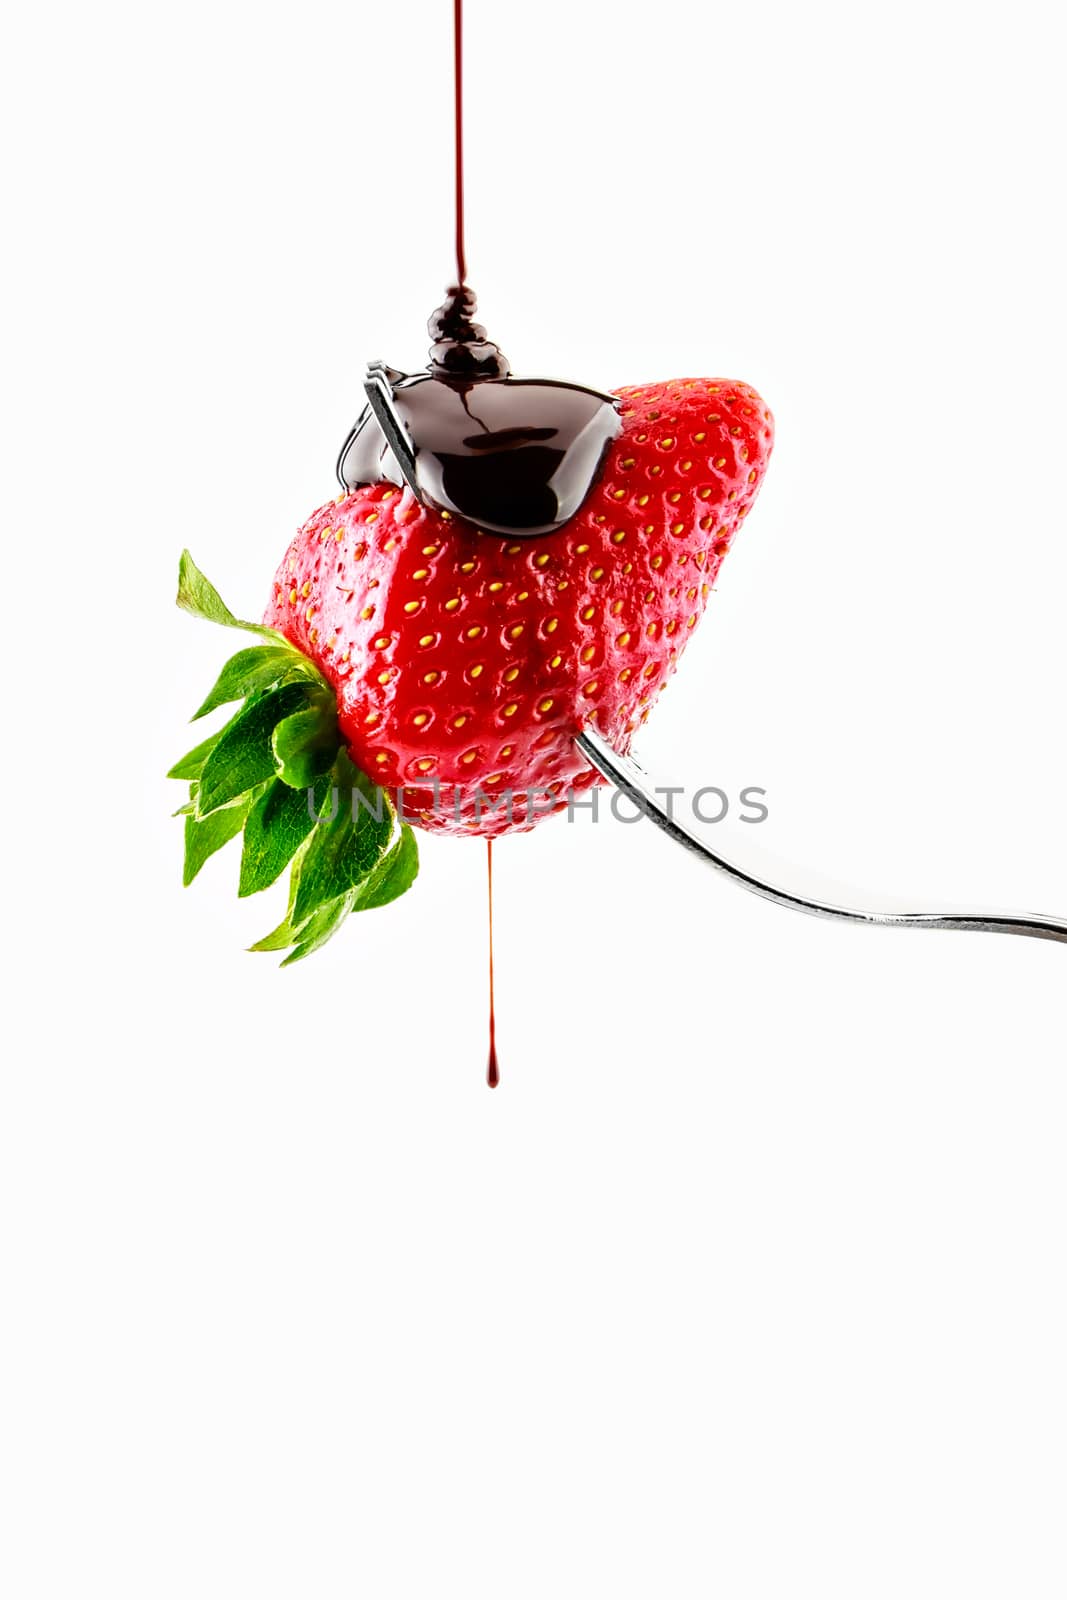 Strawberry on fork falling liquid chocolate on a white background.Vertical image